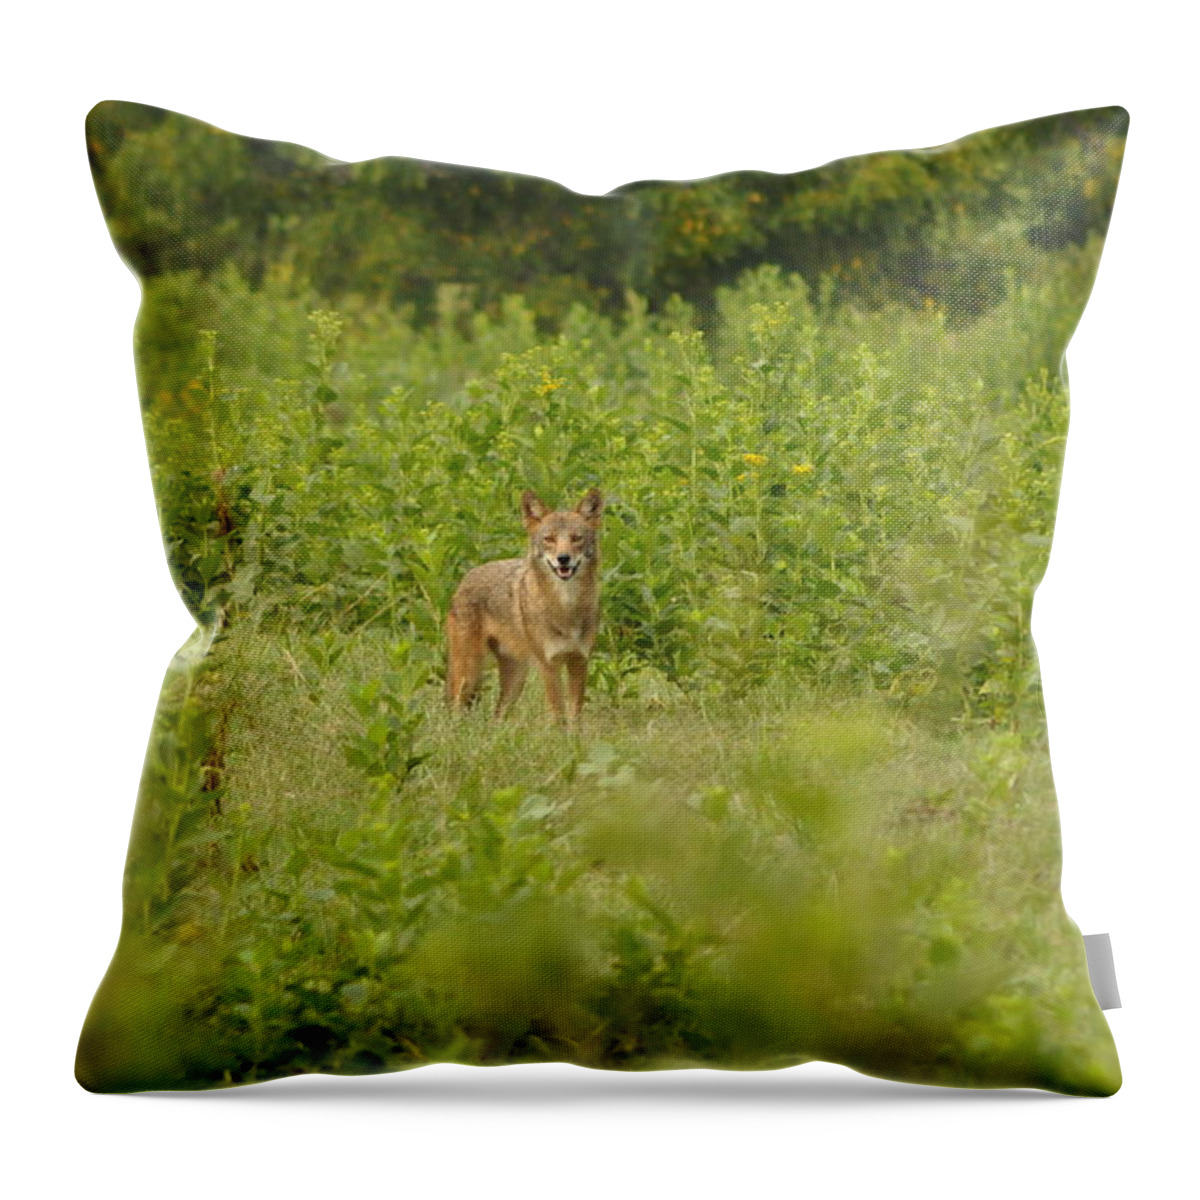 The Coyote Throw Pillow featuring the photograph One Coyote Happy by Eric Liller